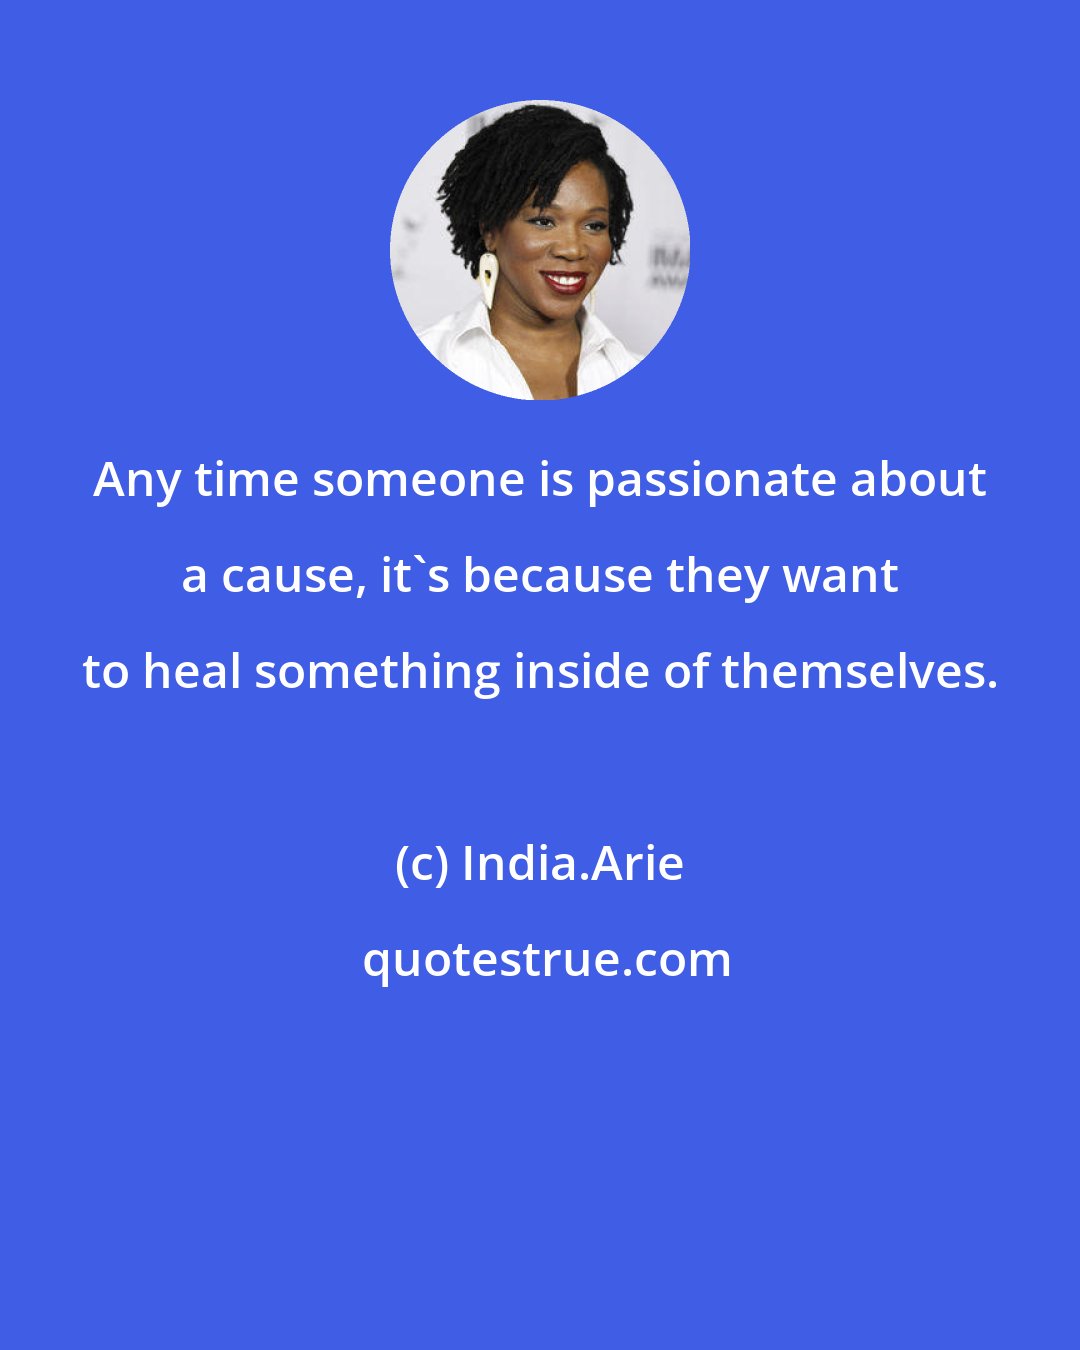 India.Arie: Any time someone is passionate about a cause, it's because they want to heal something inside of themselves.